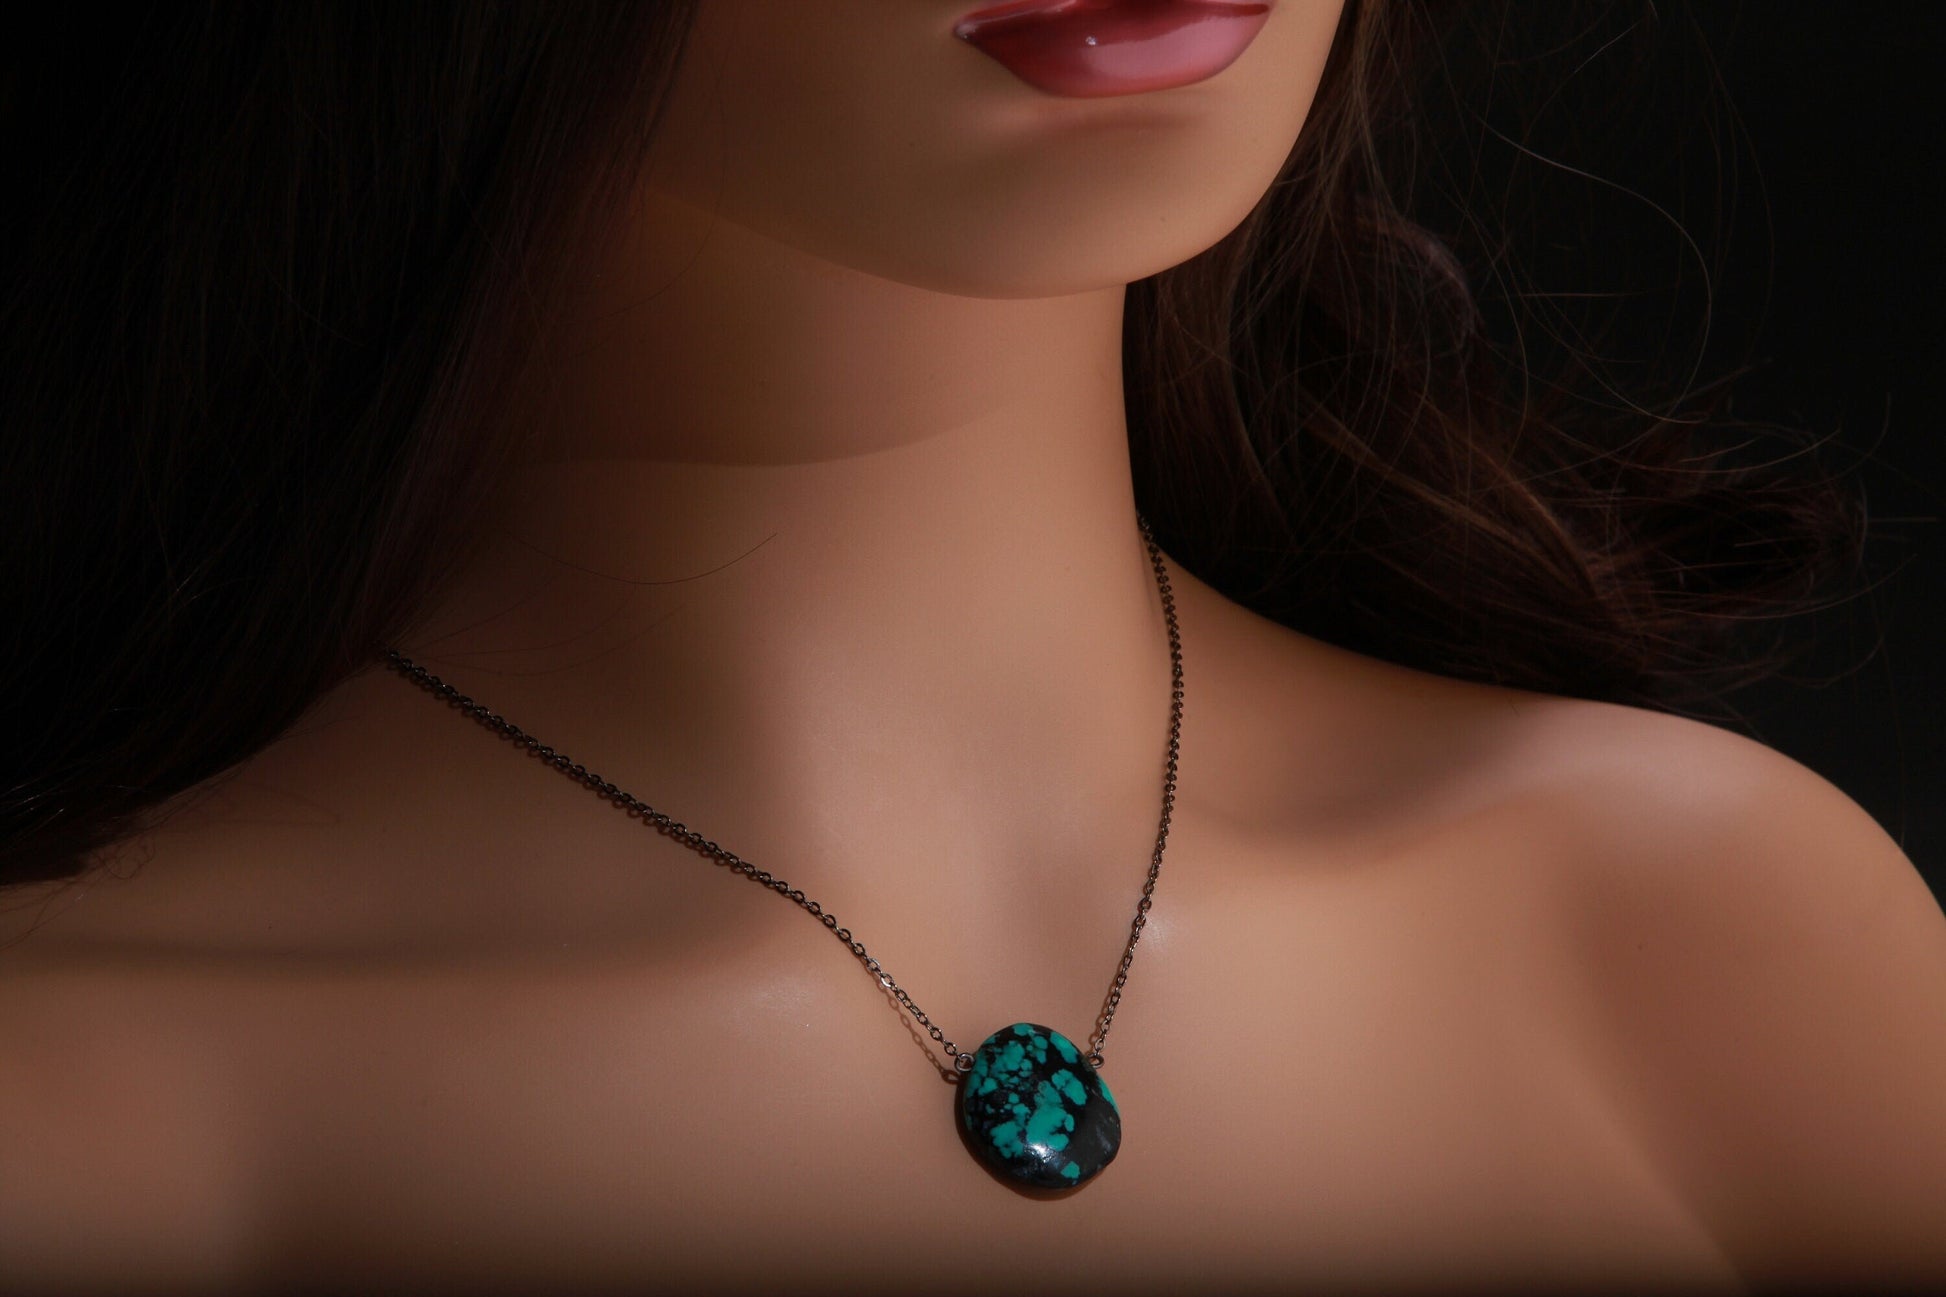 Genuine Tibetan Spiderweb Turquoise Double Sided Free Form Oval Pendant in Oxidized Silver Cable Chain 18.5&quot; +2&quot; Extension, Gift For Her